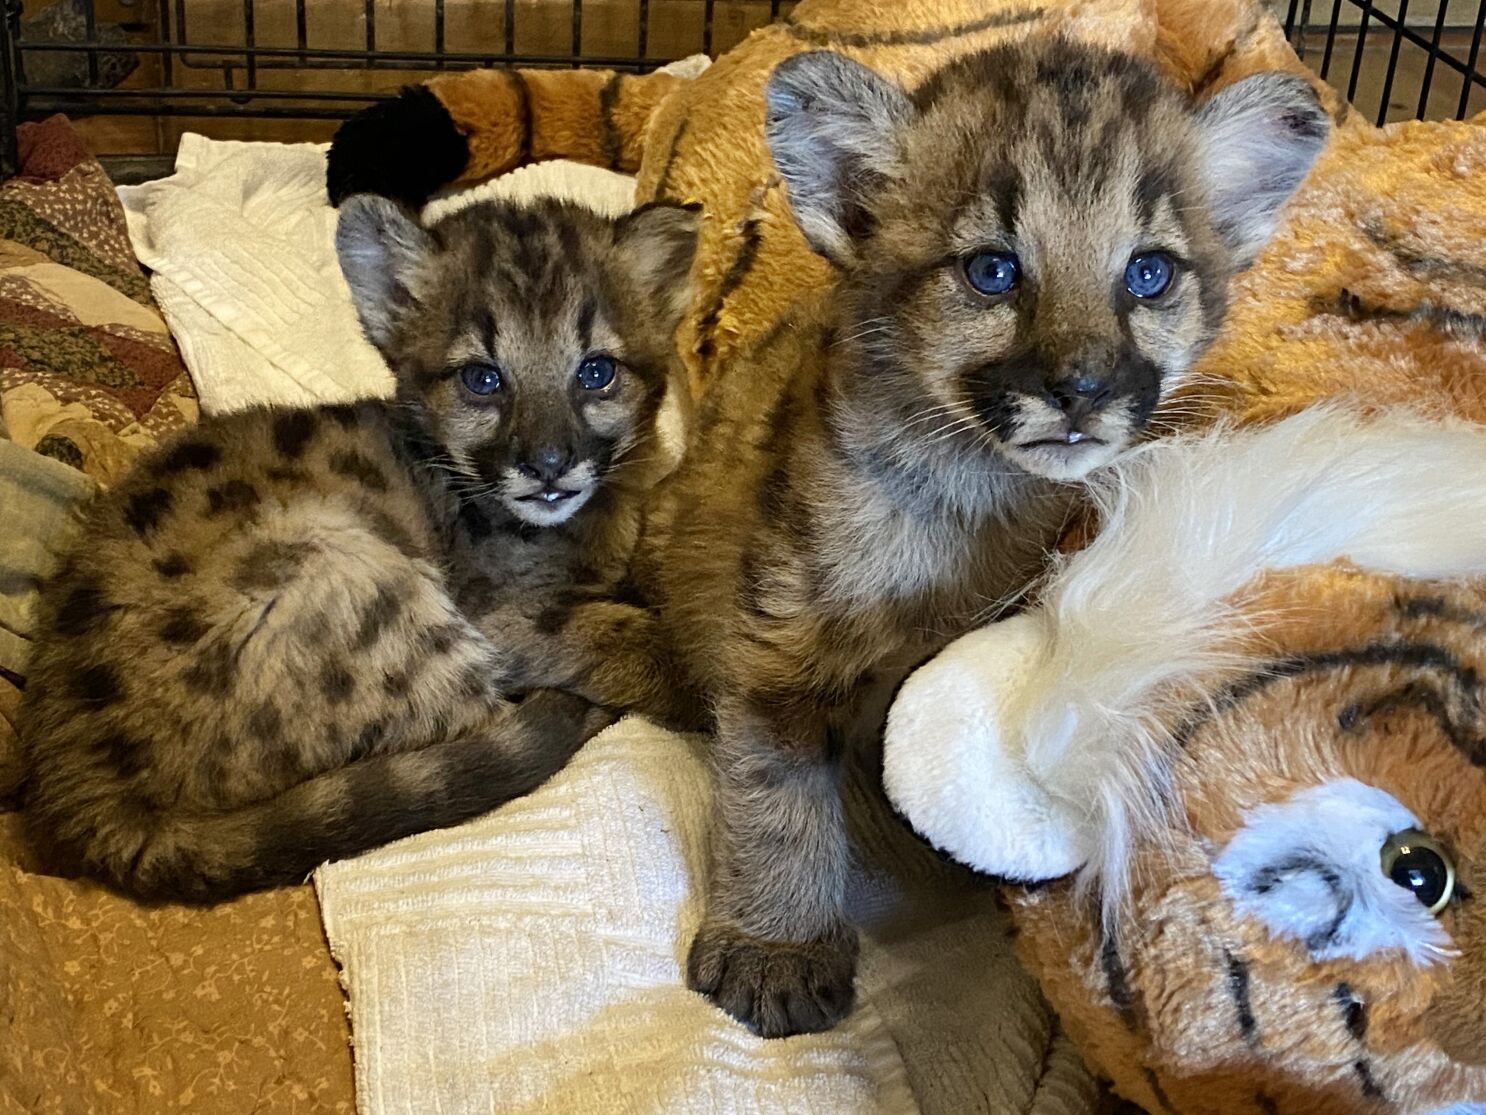 Effort to foster orphaned mountain lion cubs in wild fails - Los Angeles  Times